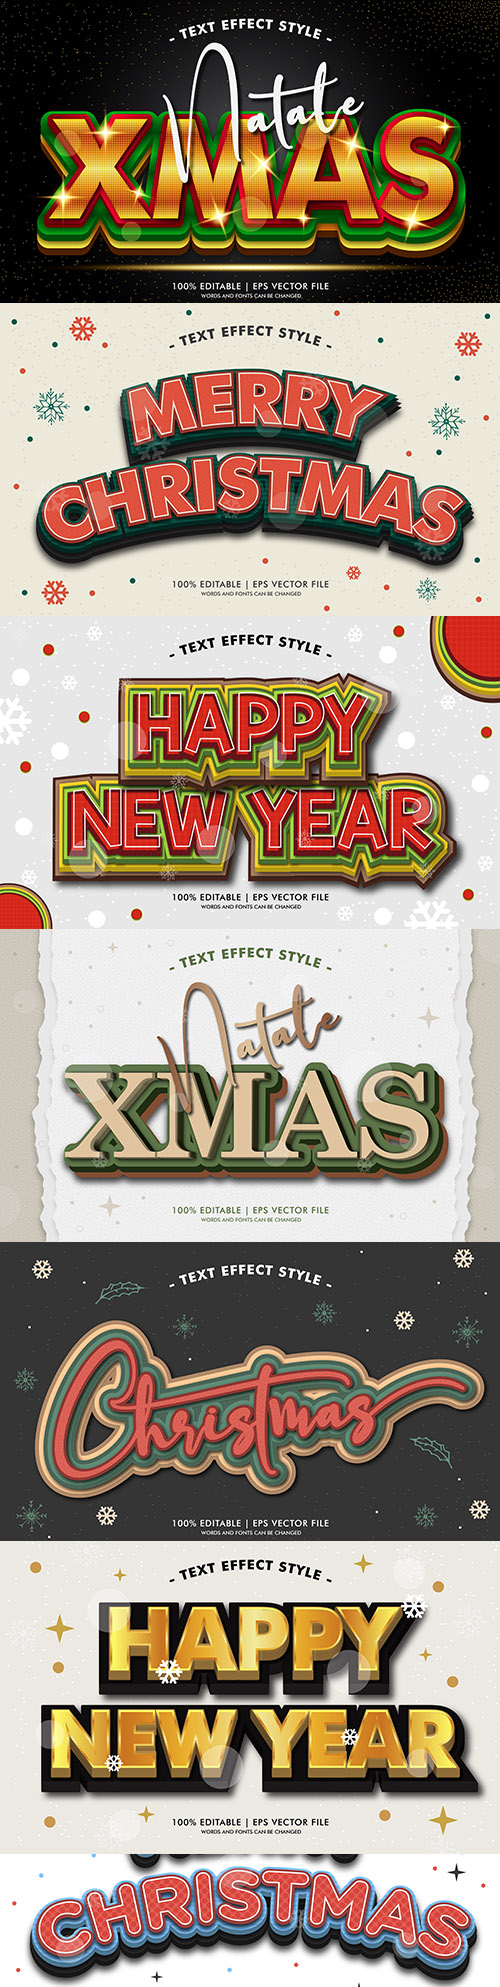 Merry Christmas editable font effect text collection 3 
